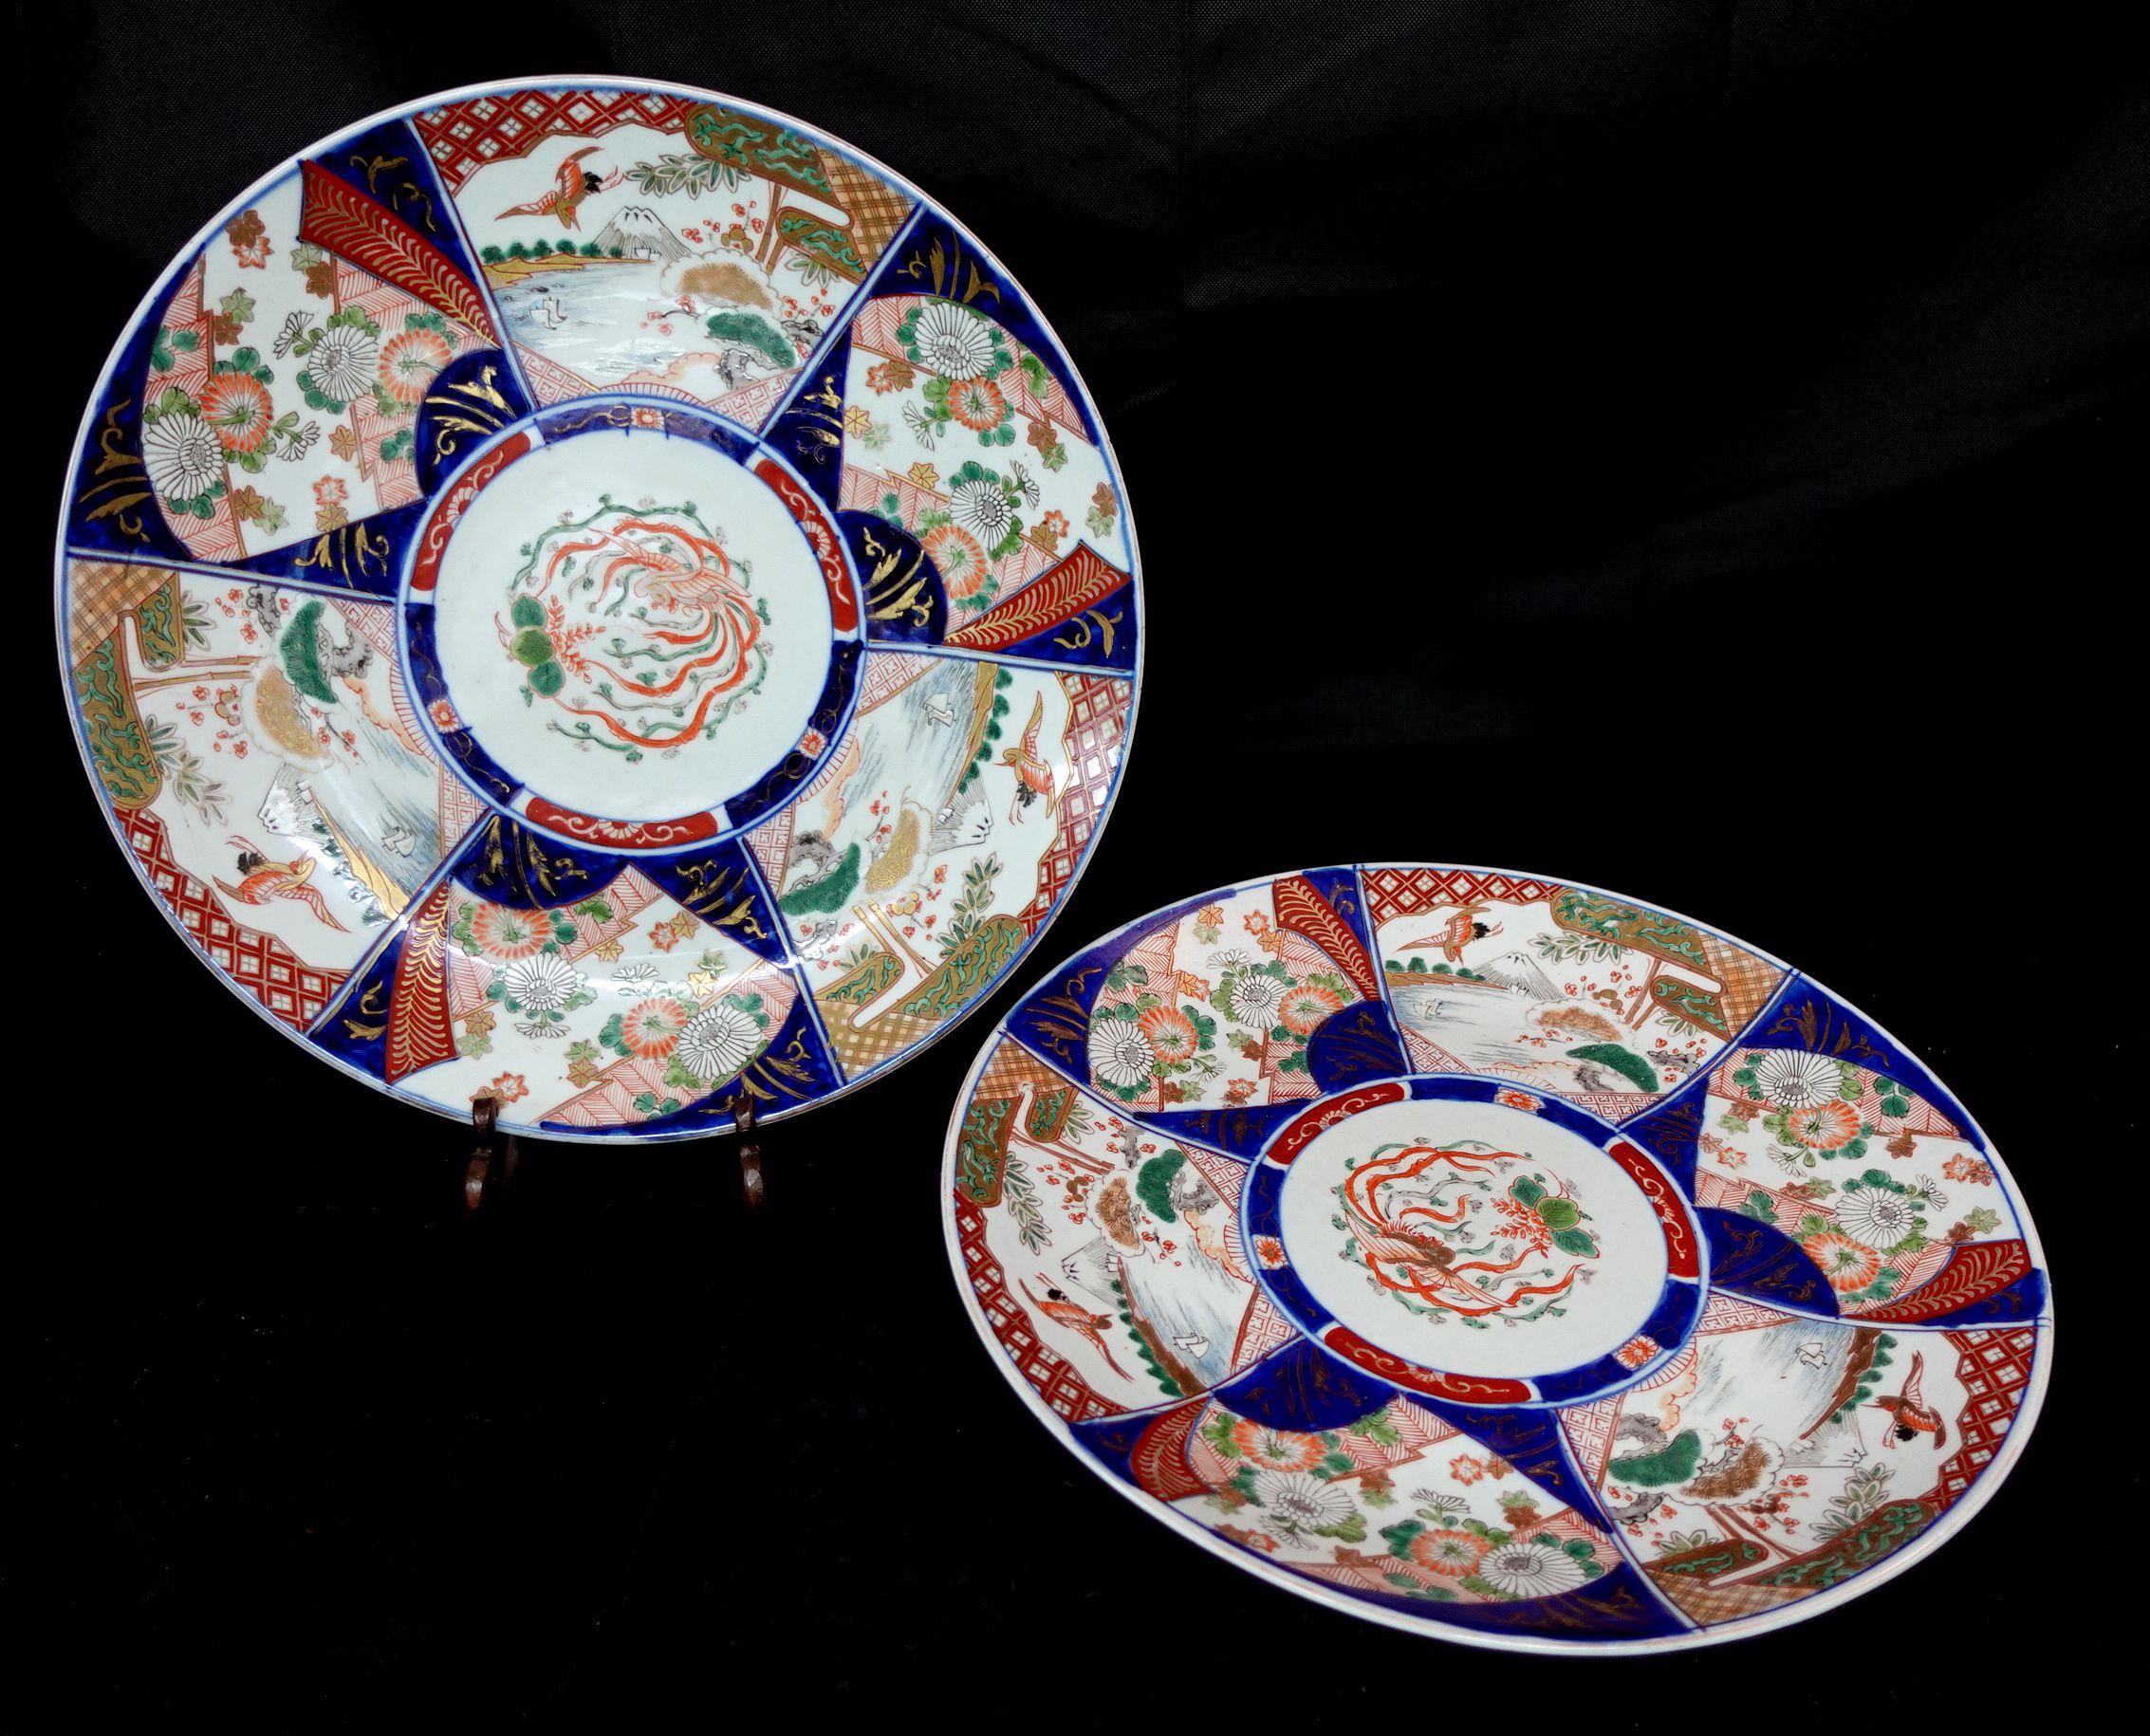 A Pair of large Japanese Imari Chargers from the Maji period of the 19th Century with phoenix and garden scenes designed in 6 different patterns surrounding the entire charger and a painting of a phoenix dominating the center part forming the